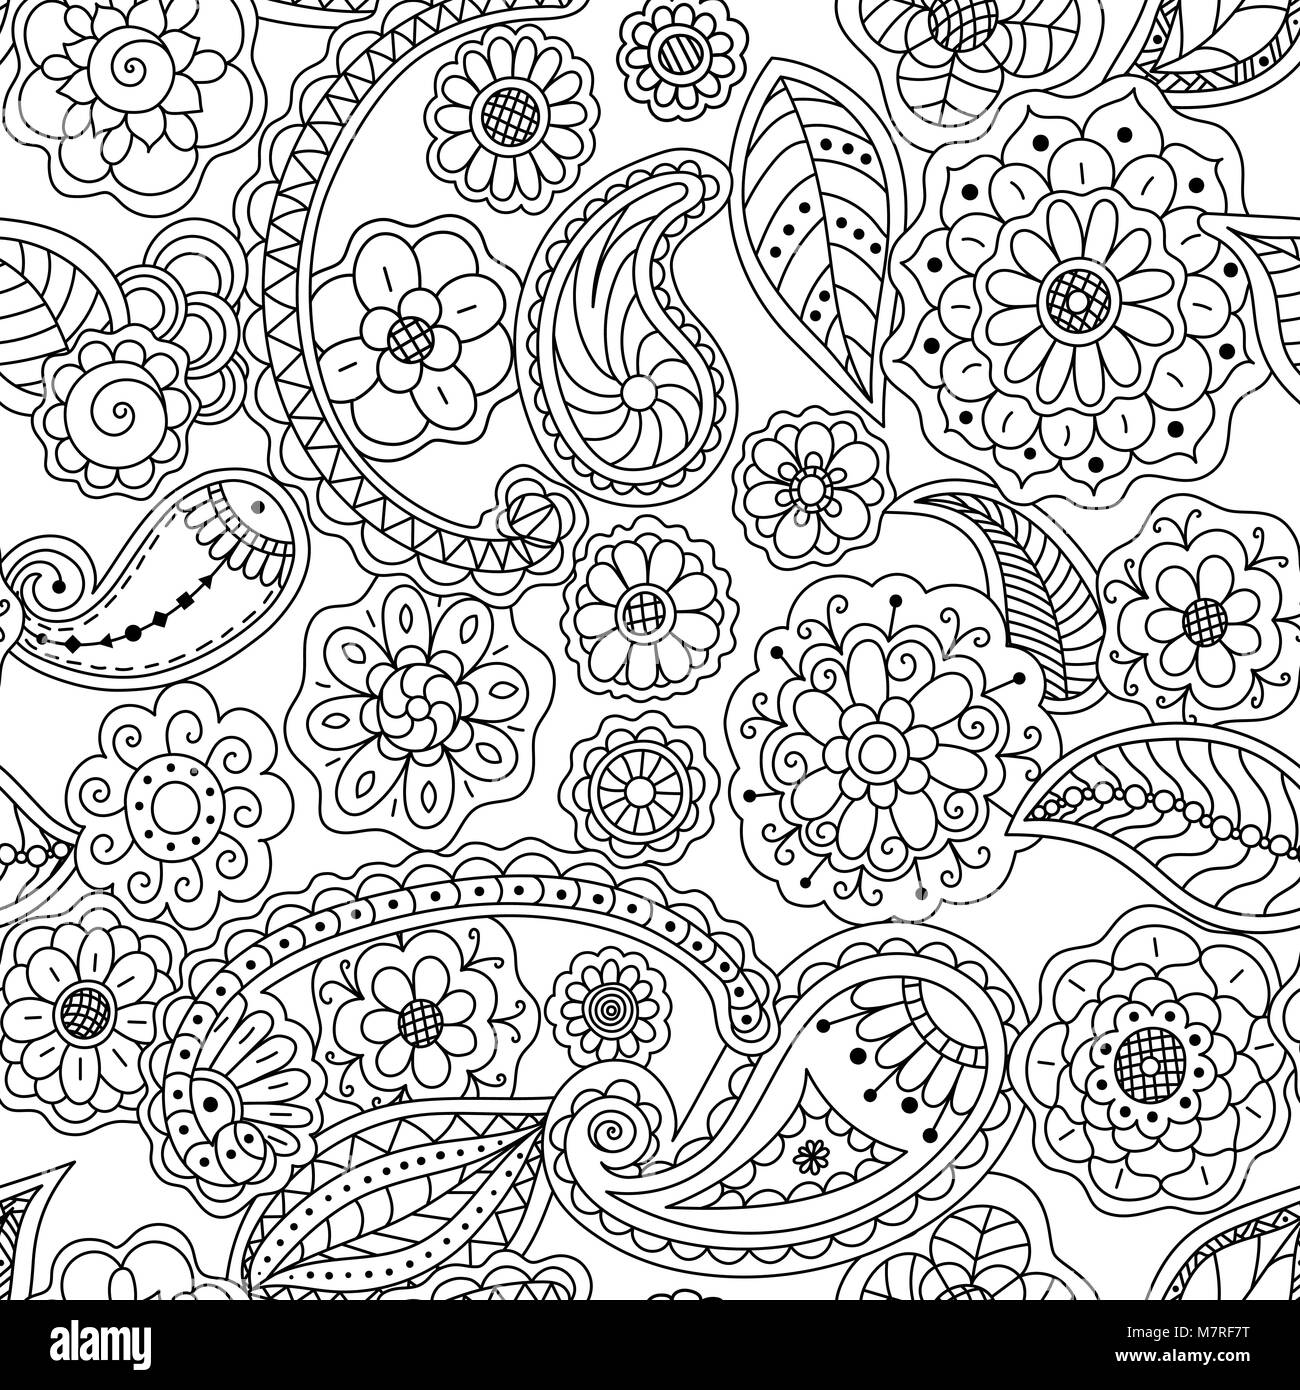 Seamless pattern of floral doodle elements. Vector coloring page book ...